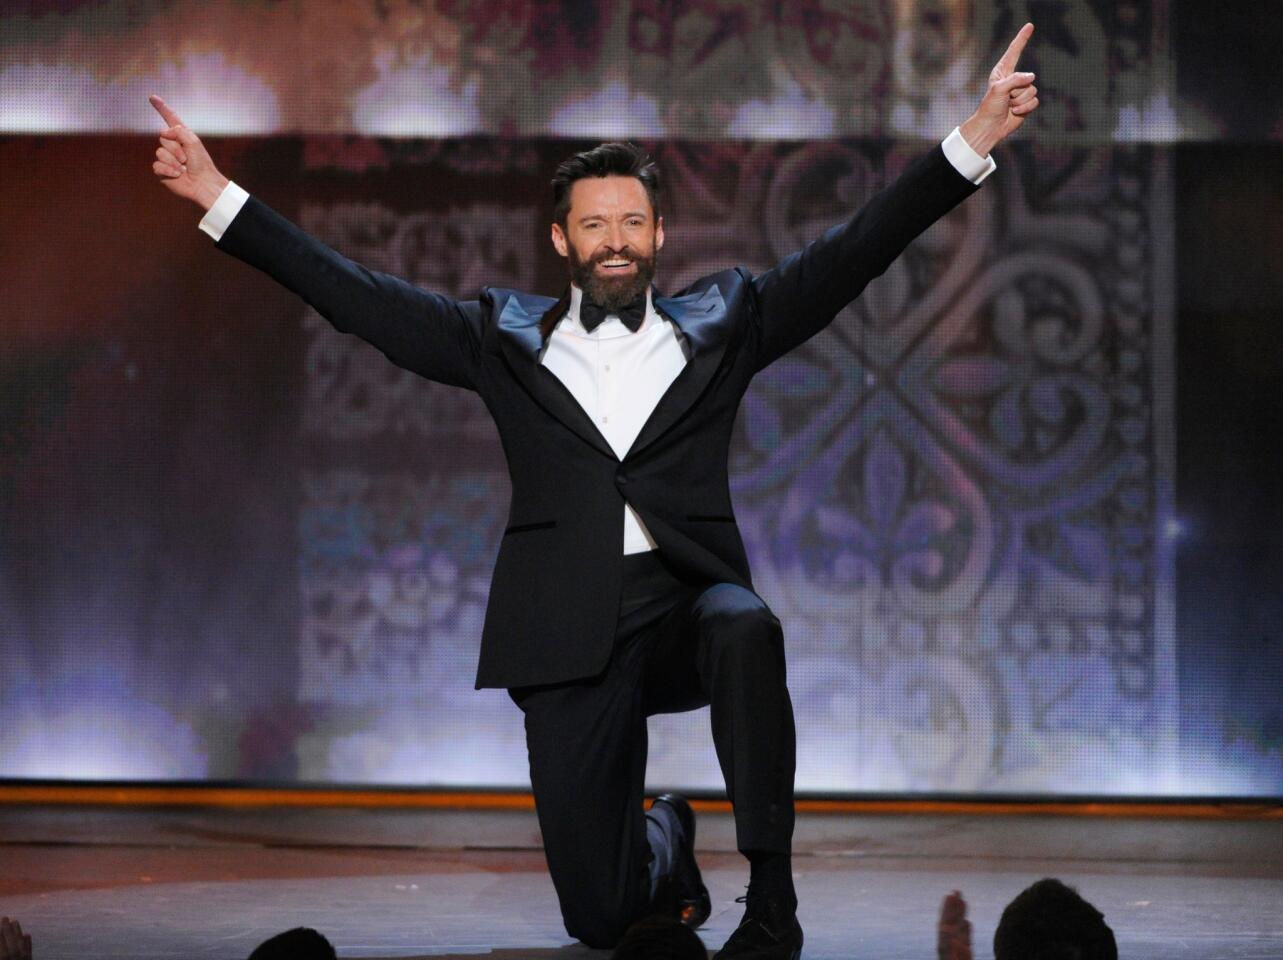 Host Hugh Jackman opened the Tonys with an homage to Bobby Van's endlessly hopping "Take Me to Broadway" number from the 1953 film "Small Town Girl." The bit proved to be a Rorschach test with audiences, half saying, "How charming!" and the other half saying, "Why is he hopping? Stop it!"